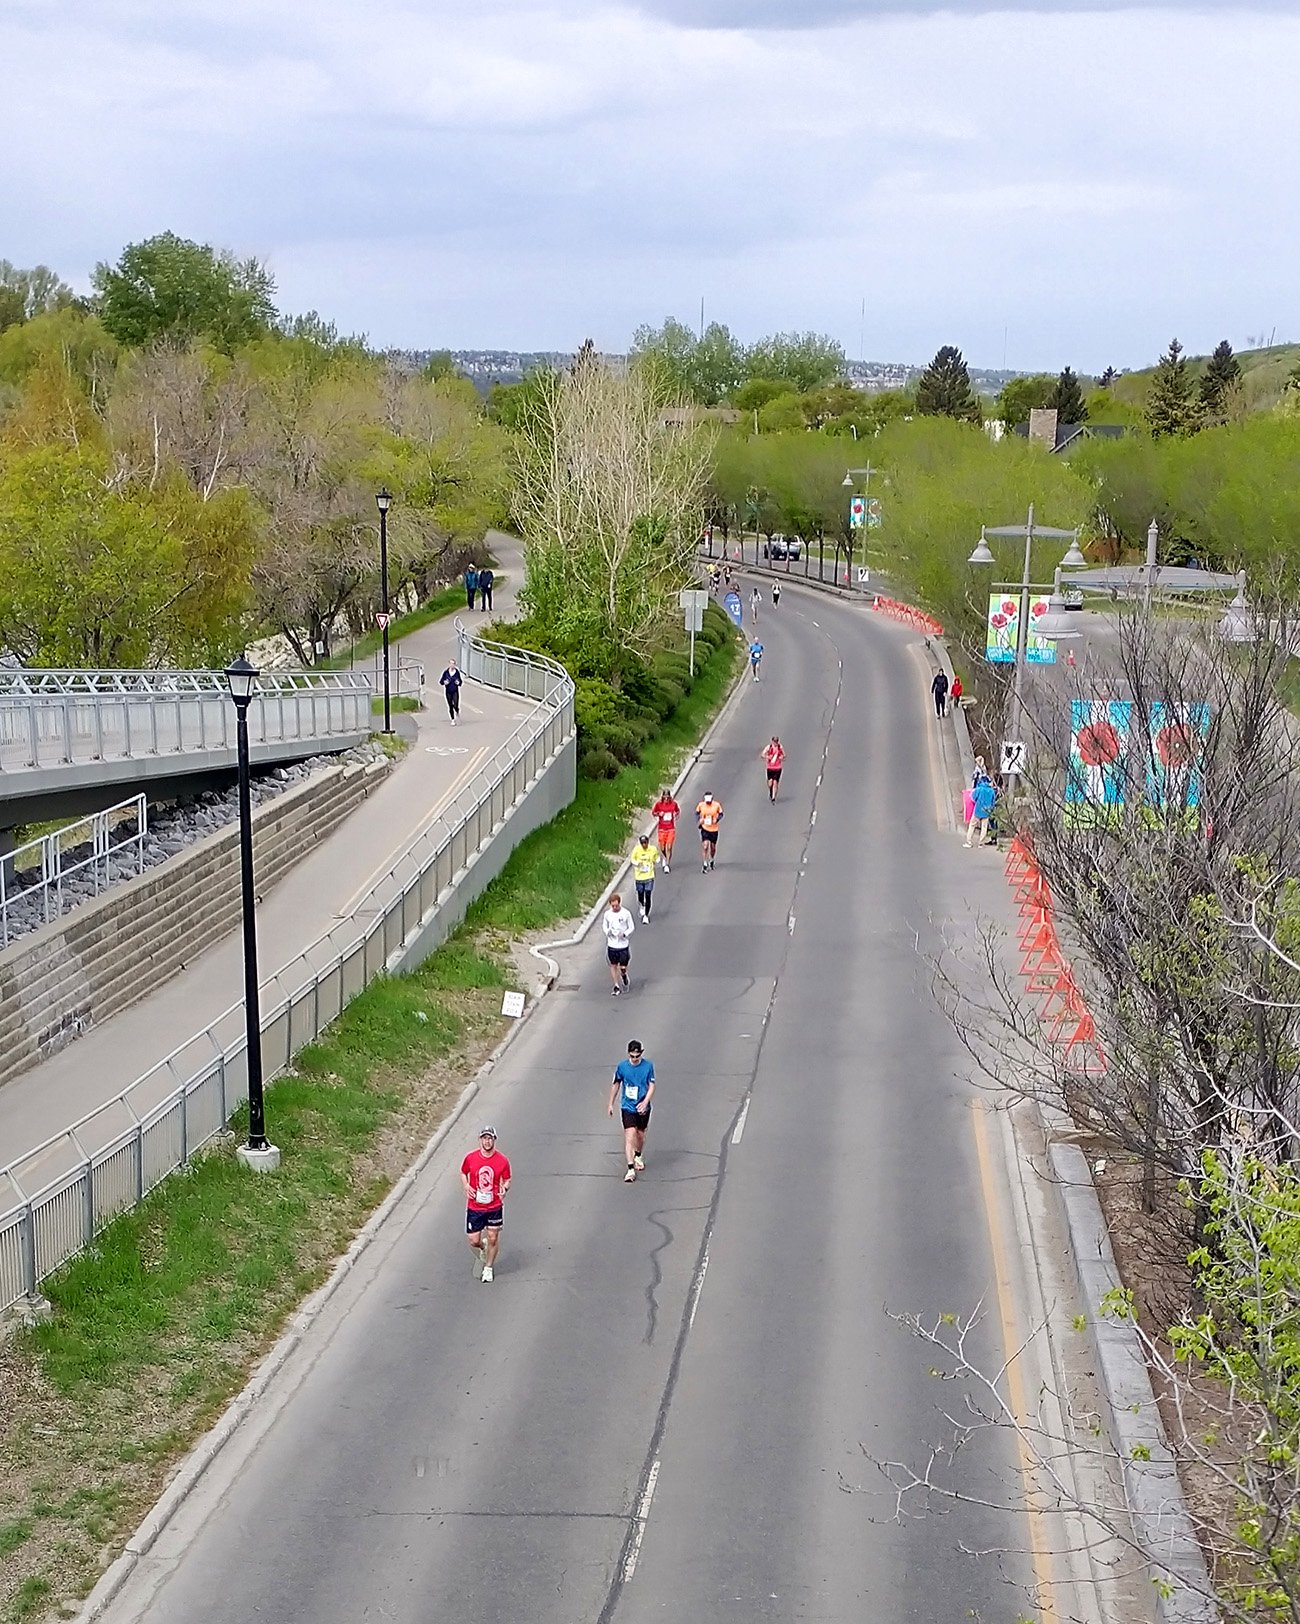 The Calgary Marathon was going on that day along much of my route. Lot of music and high fives.